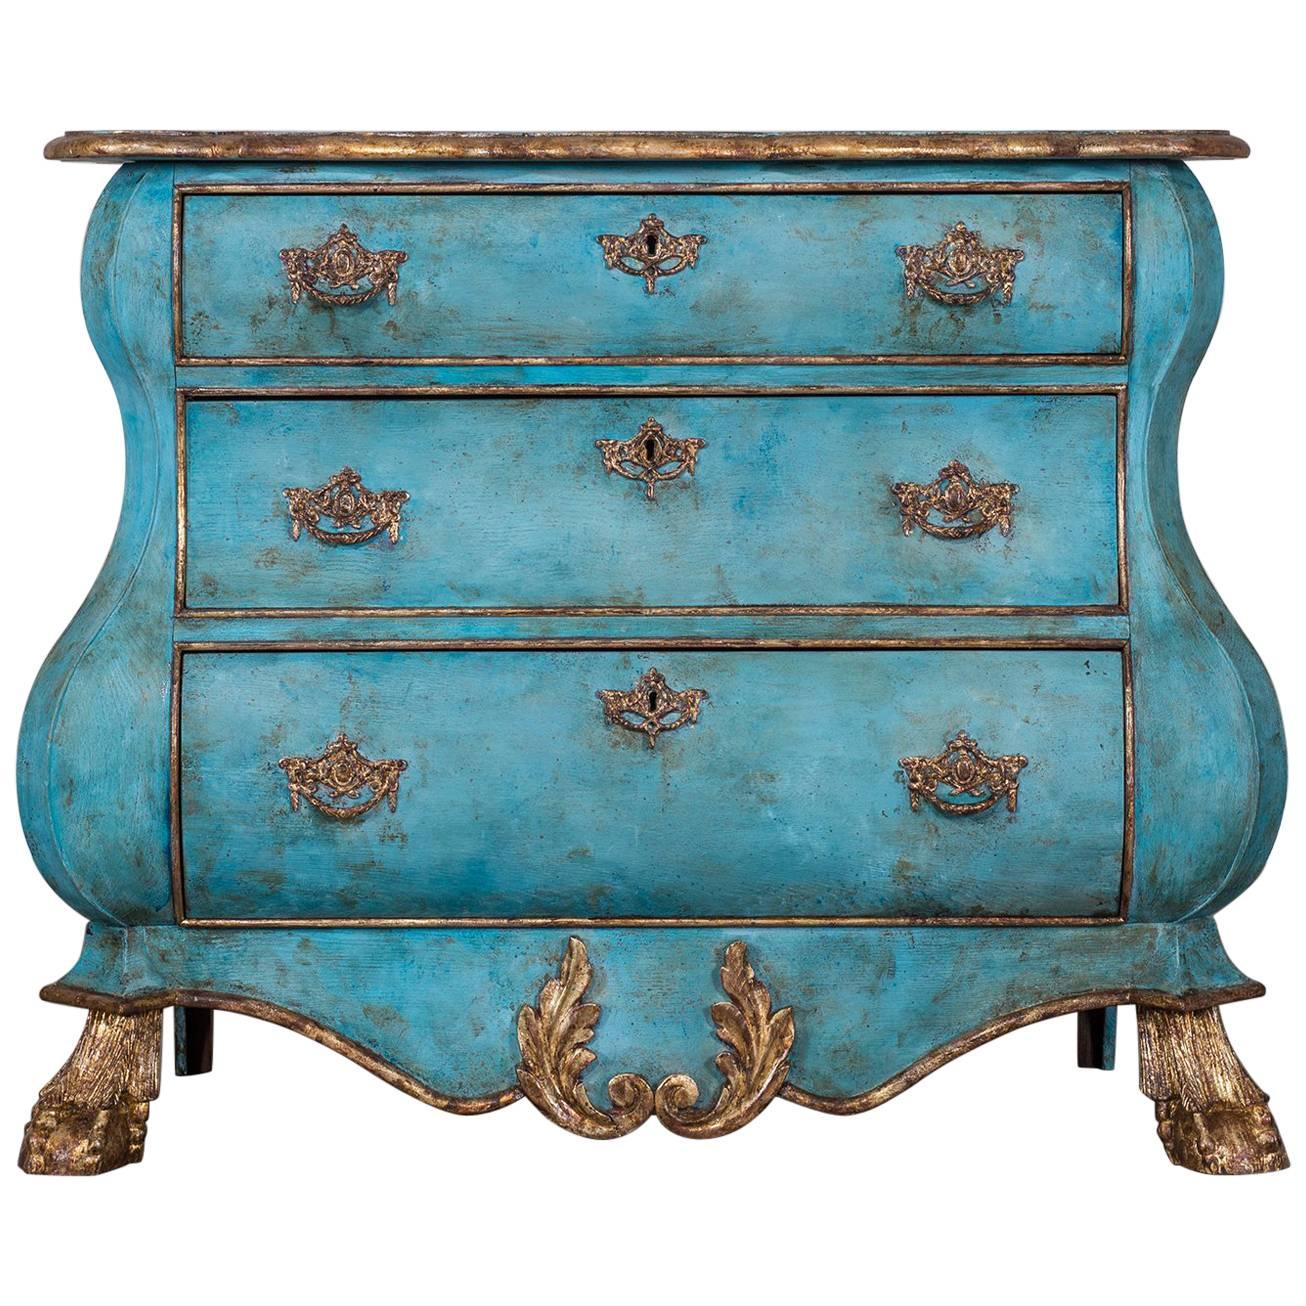 Dutch Painted and Gilded Oak Bombé Commode Chest of Drawers, Holland, circa 1850